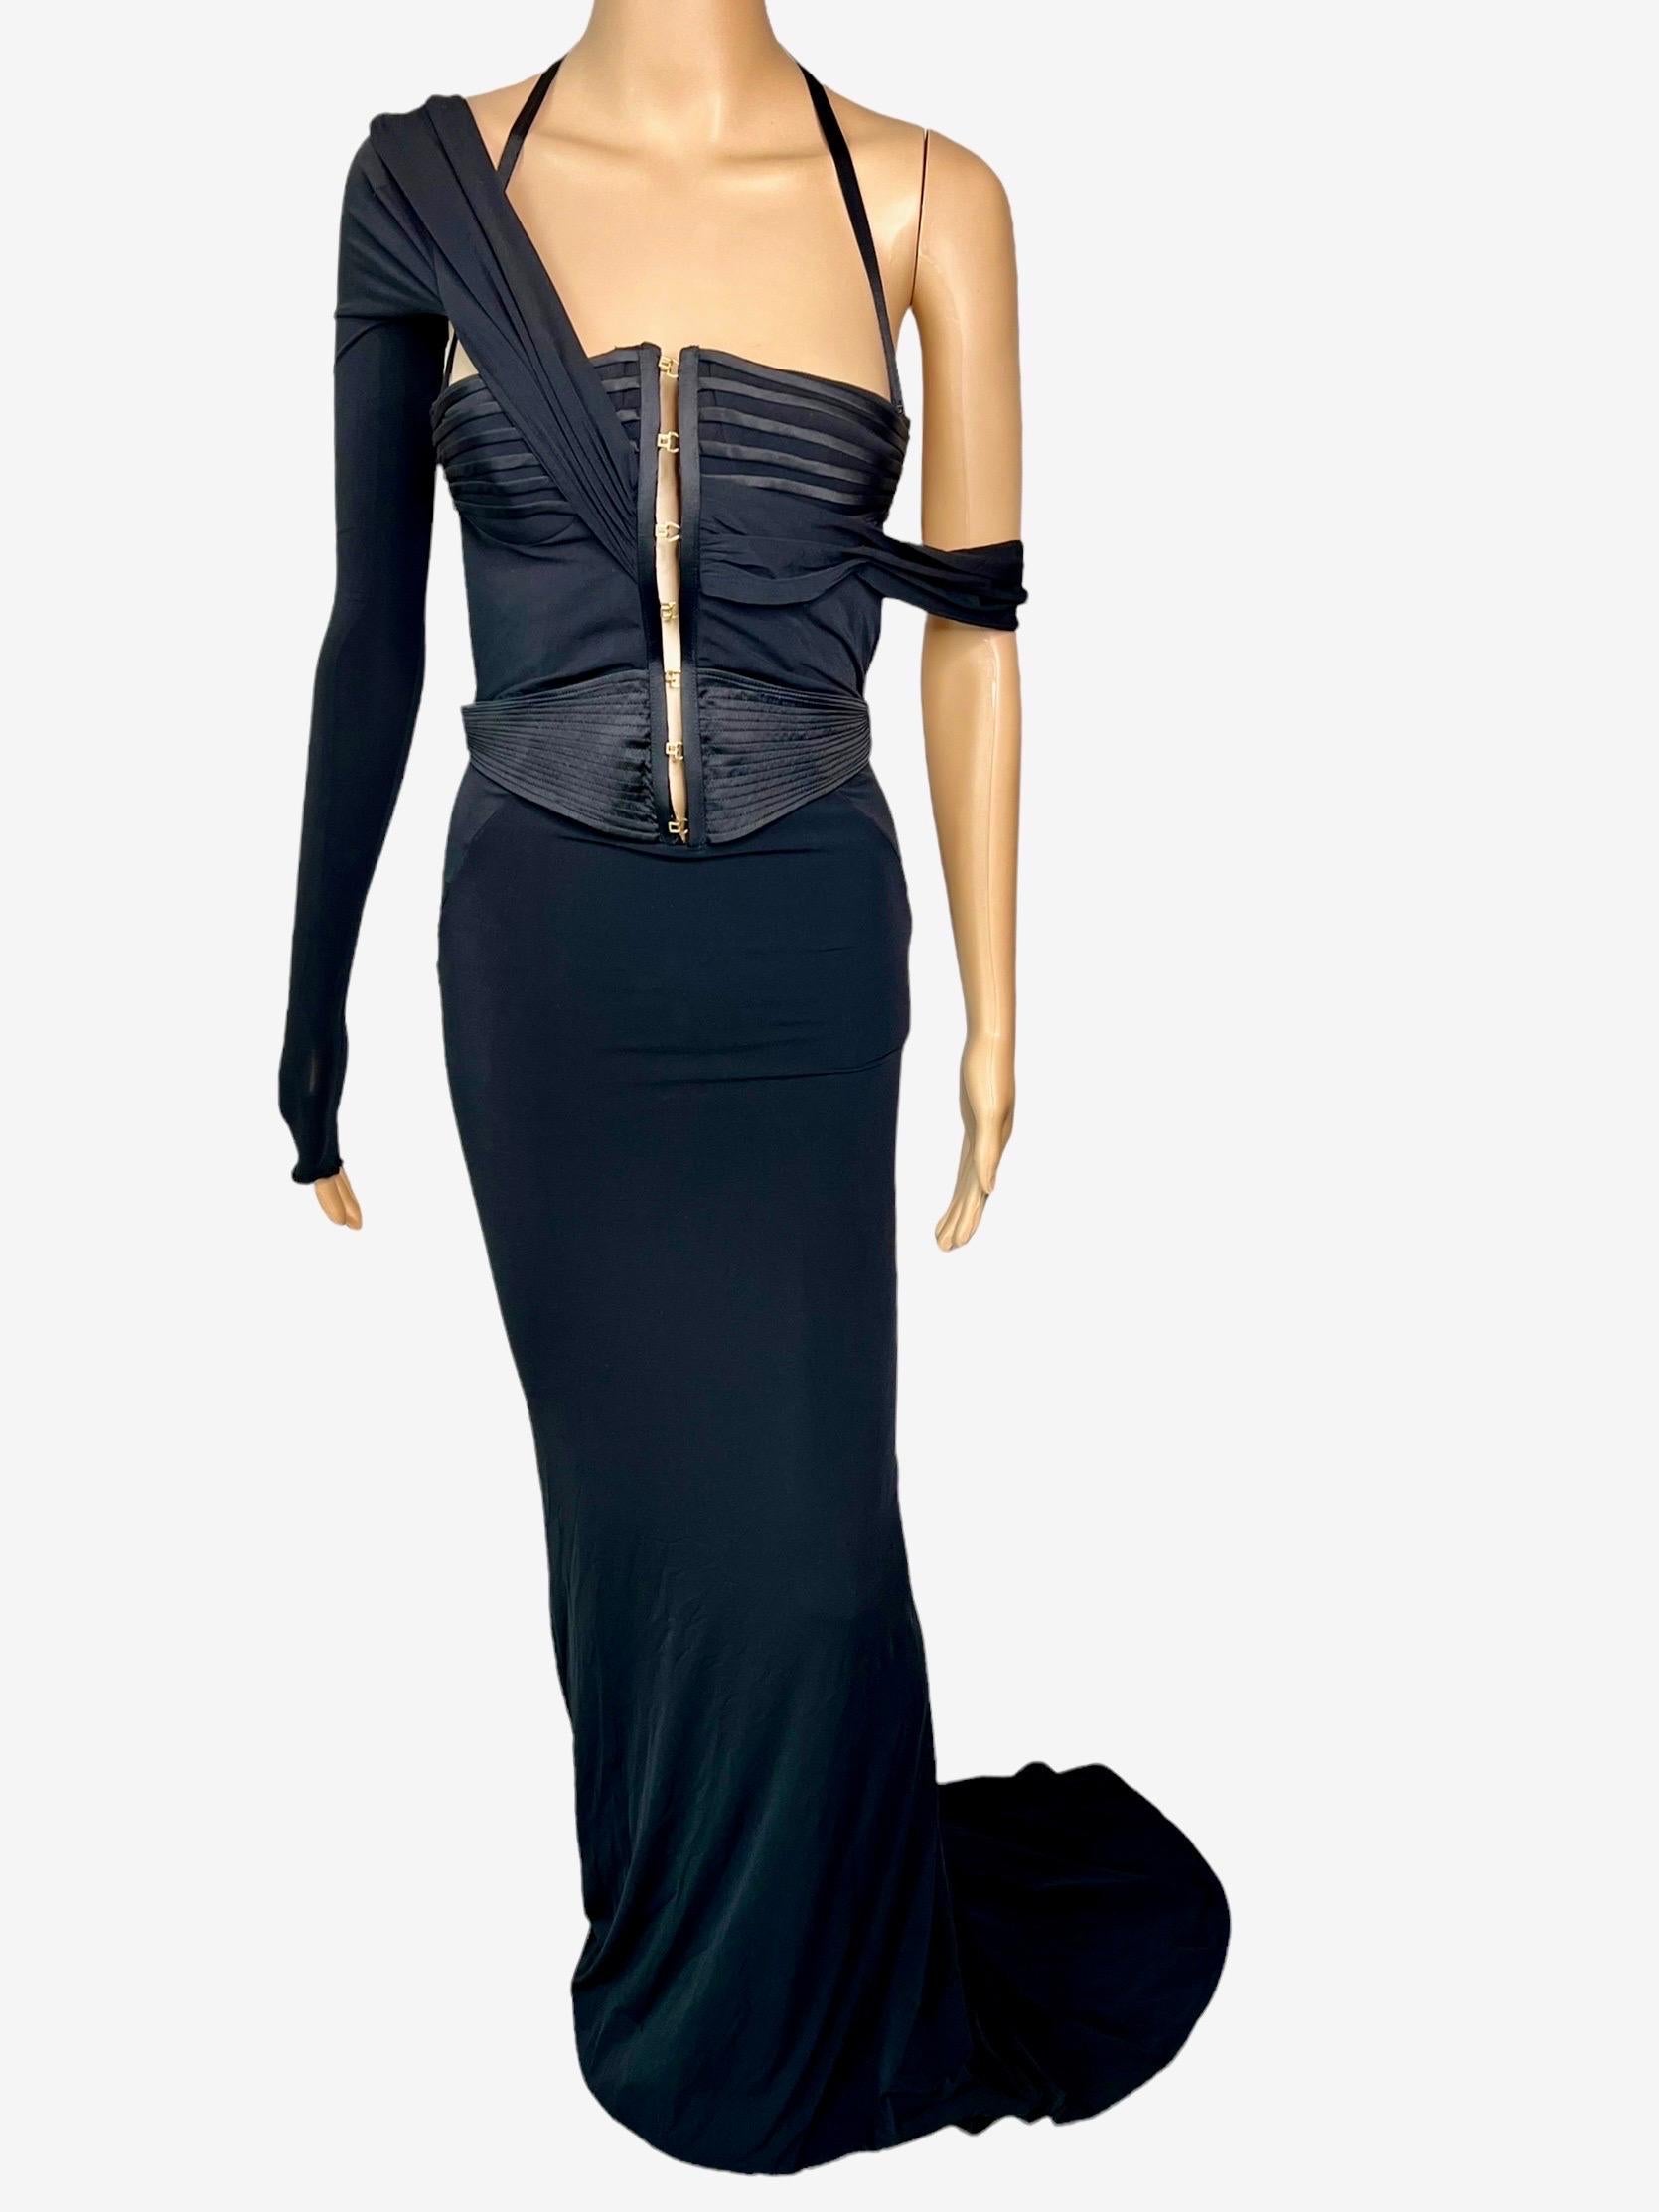 Tom Ford for Gucci F/W 2003 Bustier Corset Cutout Train Black Evening Dress Gown 5